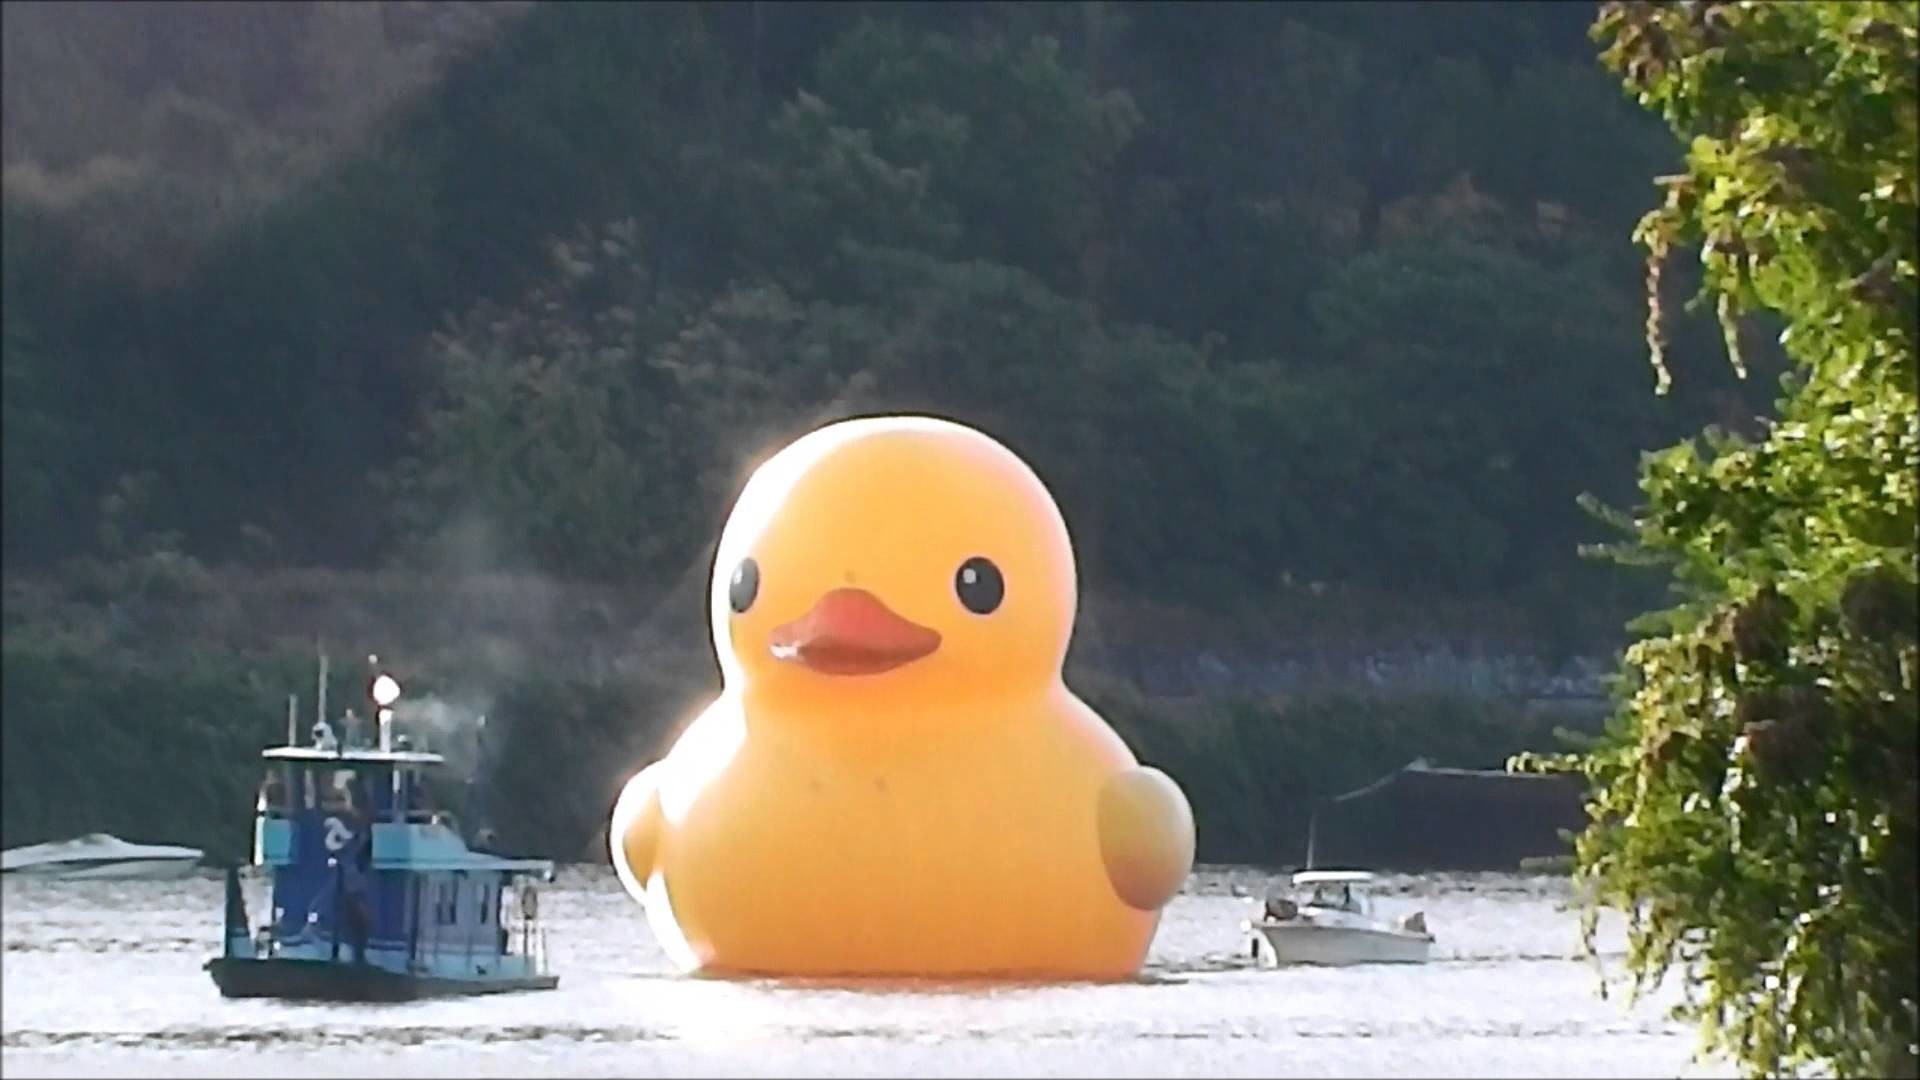 1920x1080 Rubber Duck sails into Pittsburgh